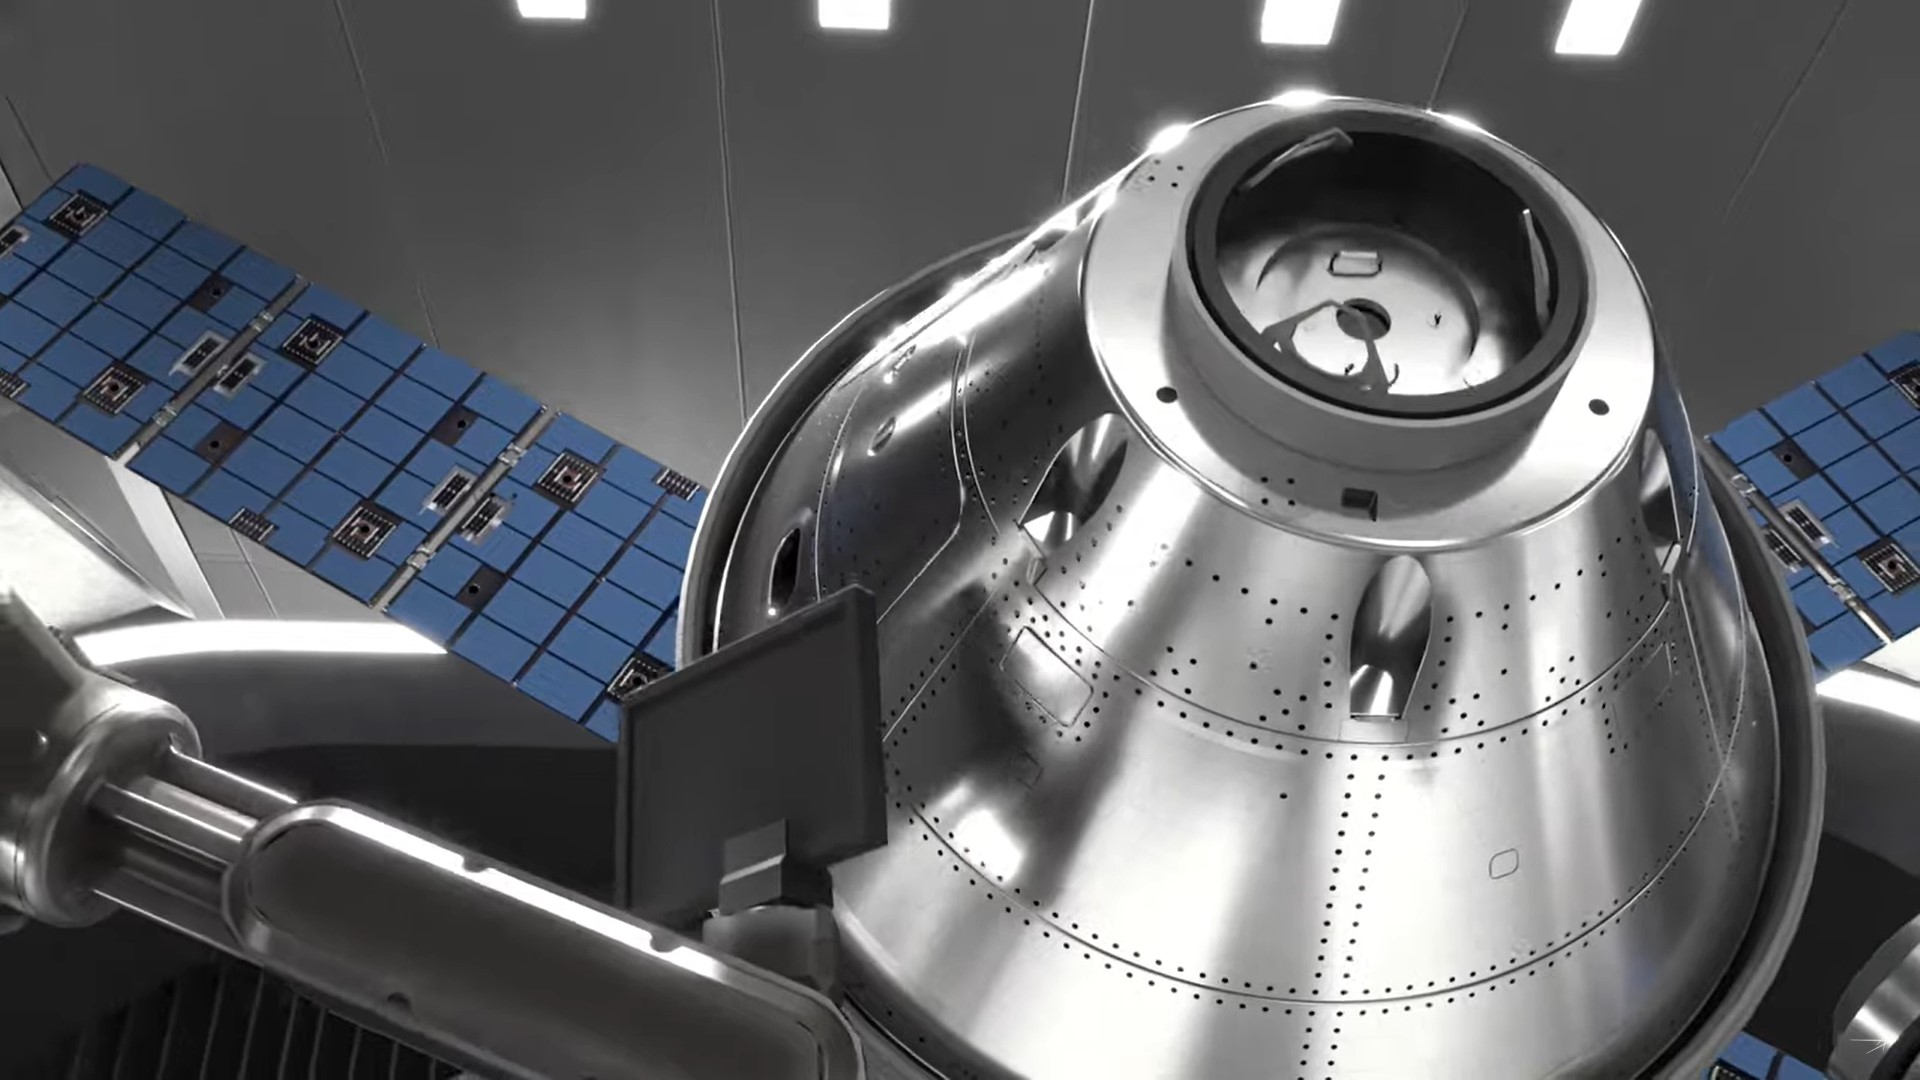 Engineering Crew Systems for a Deep Space Spaceship | Lockheed Martin